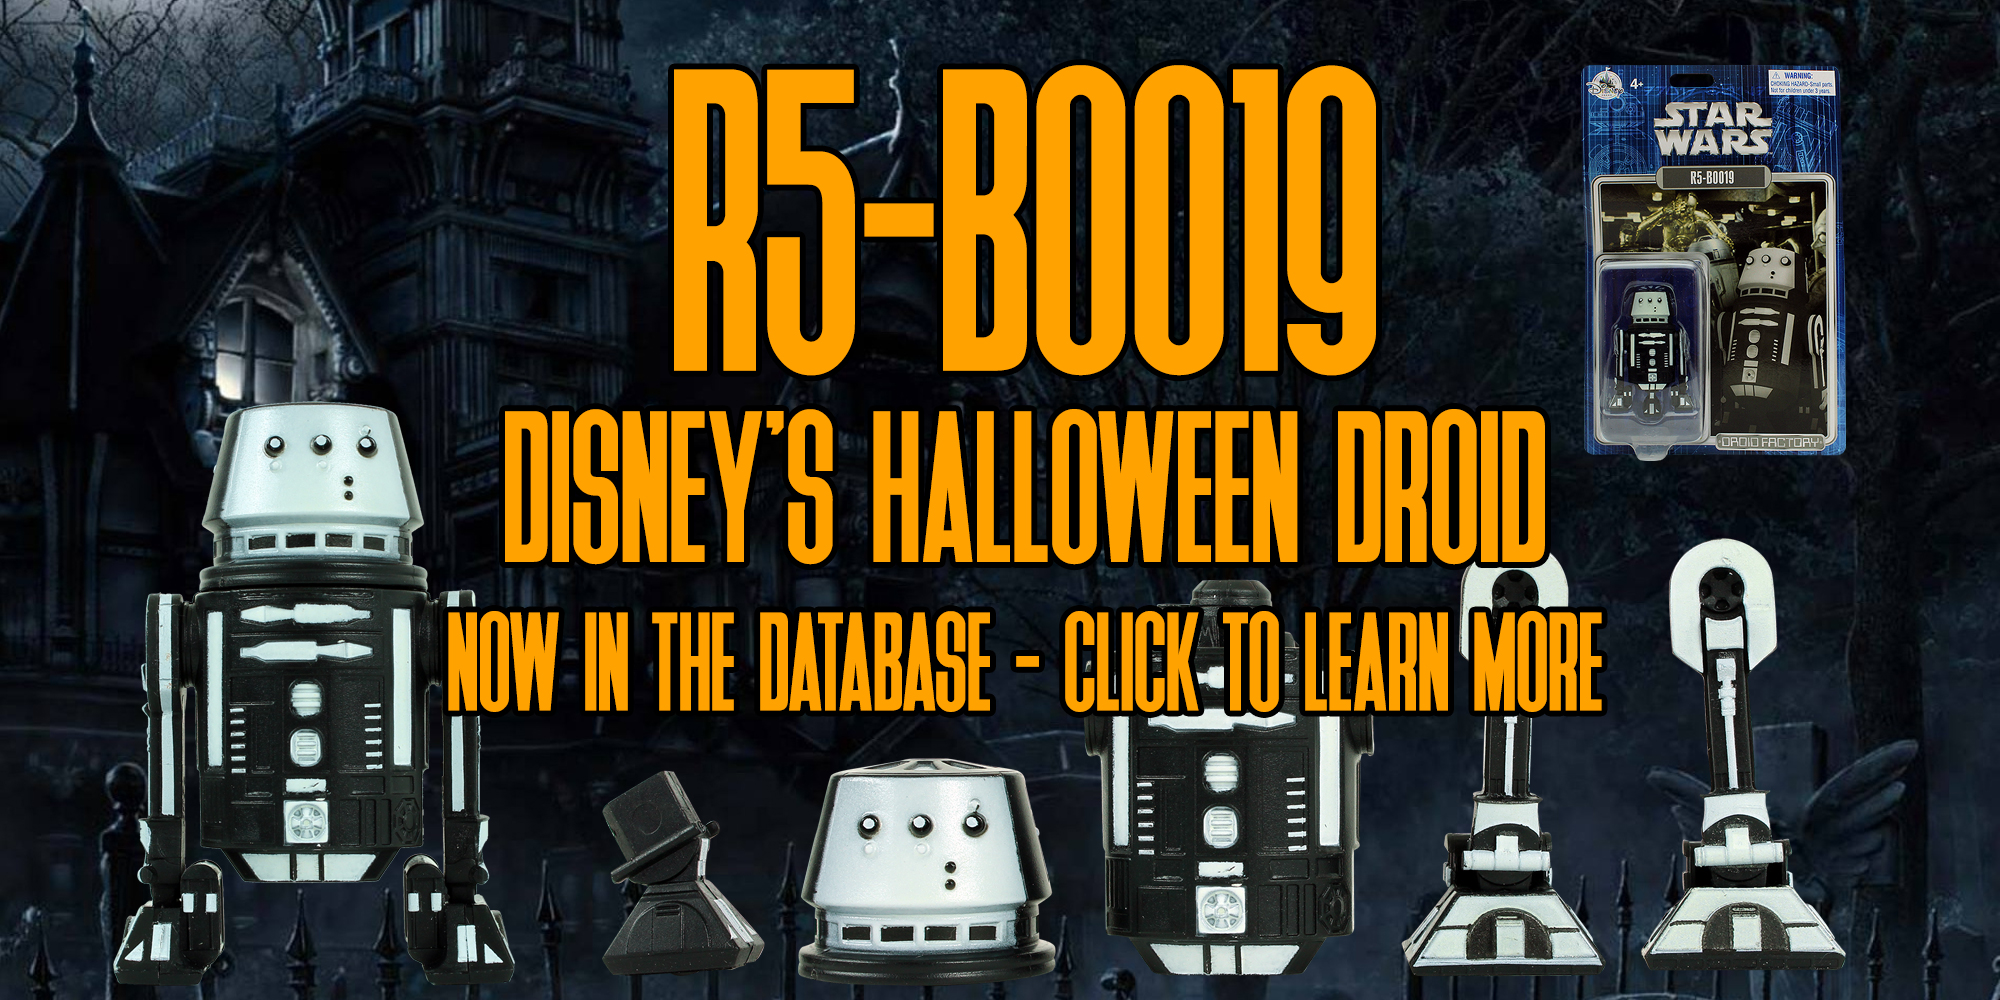 R5-BOO19 Is Now In The Database!